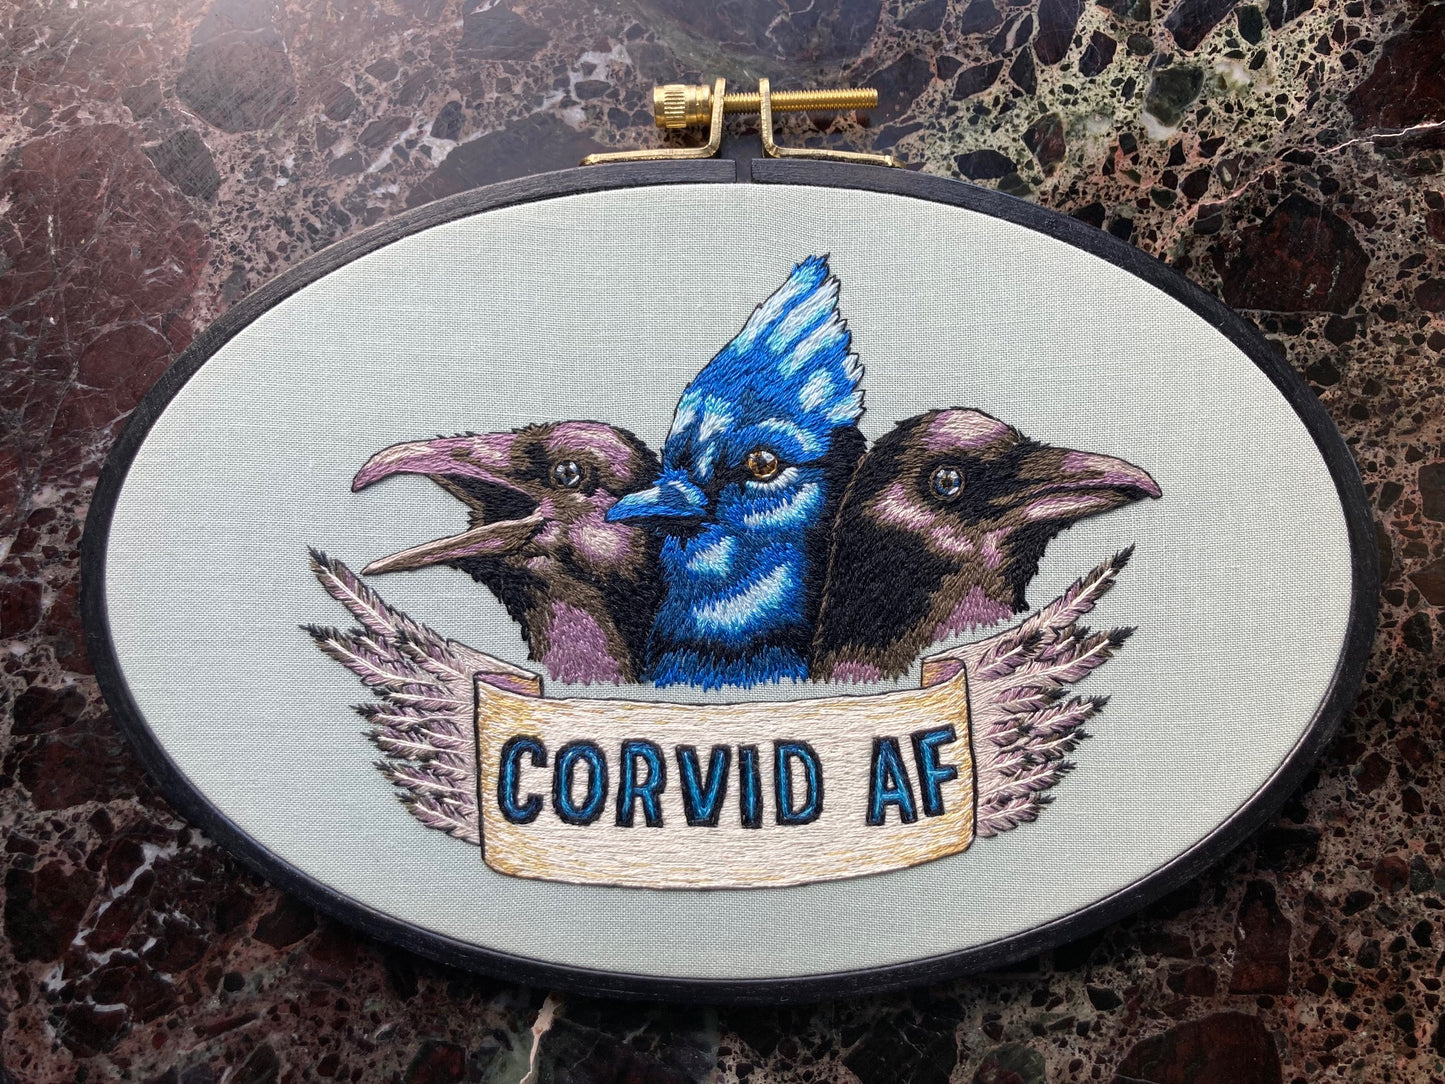 three birds are embroidered in an oval hoop. the outer birds are black and purple and the inner one is bright blue. a banner at the bottom says "Corvid AF"